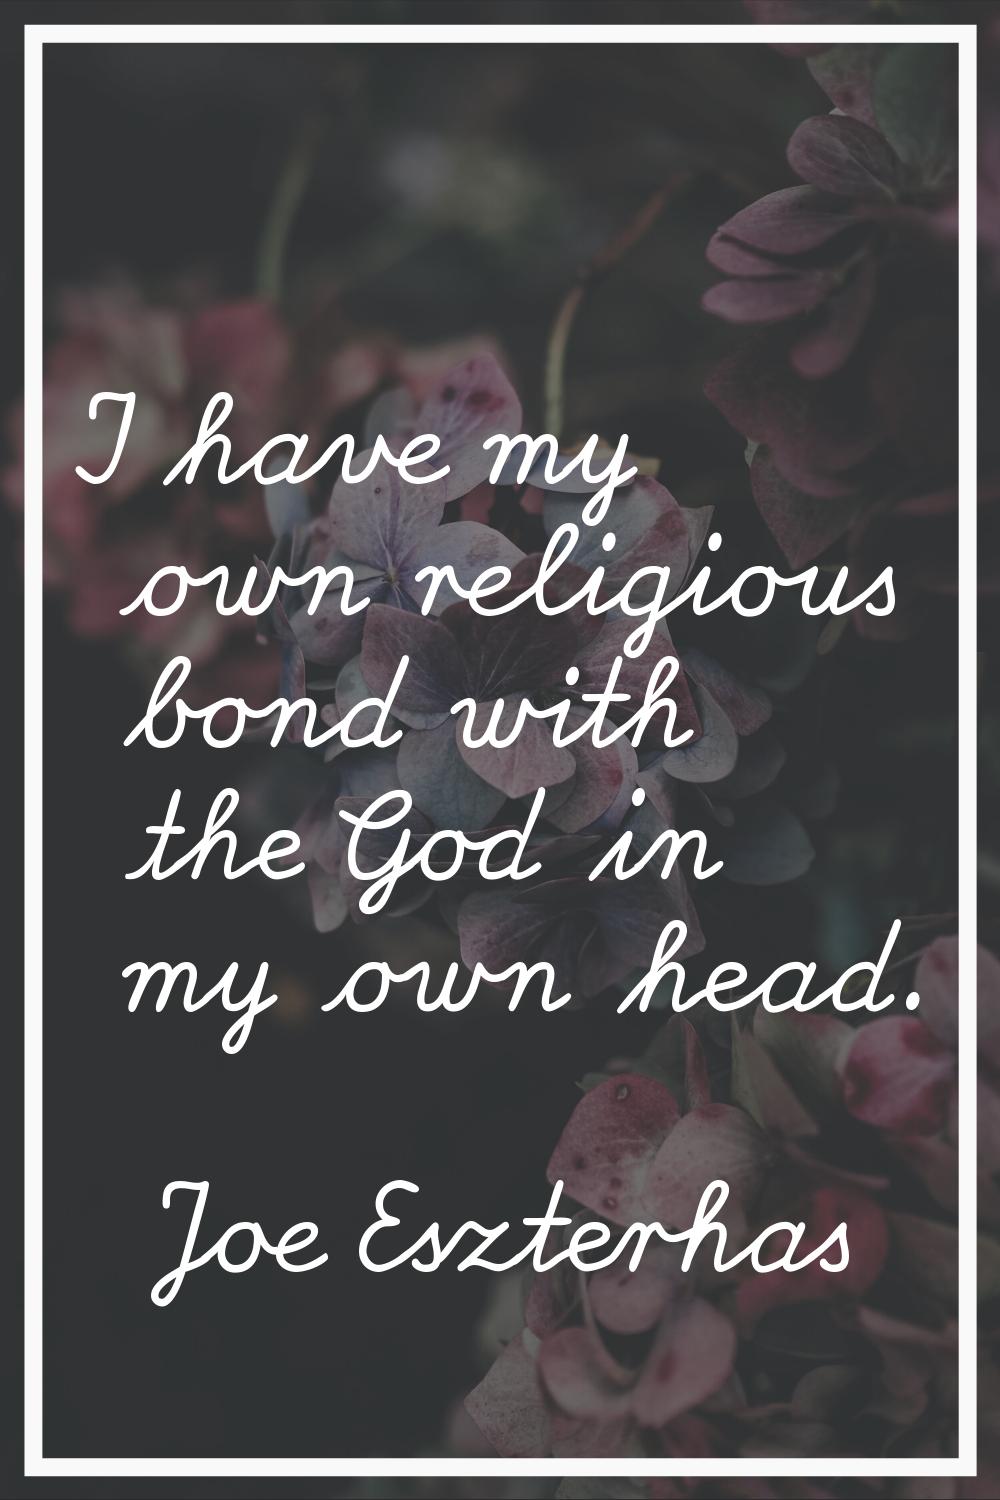 I have my own religious bond with the God in my own head.